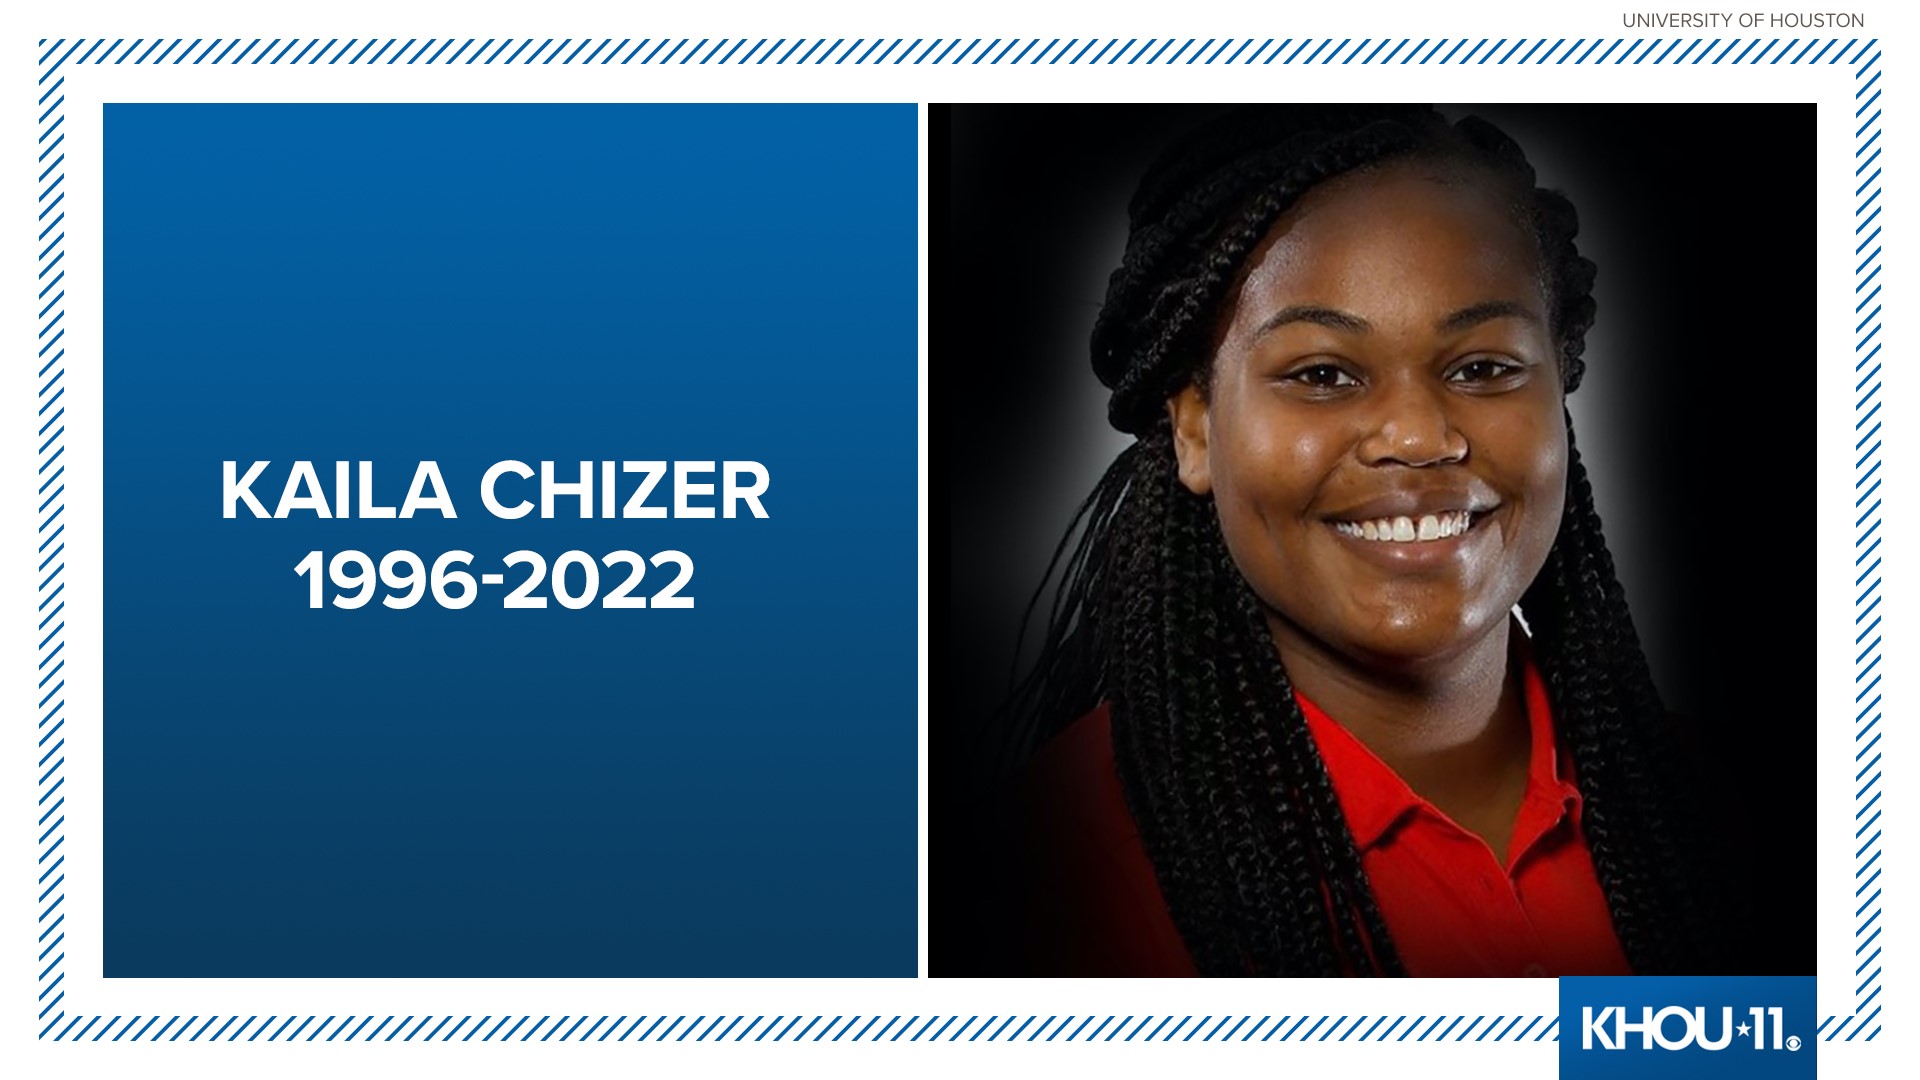 UH said 26-year-old Kaila Chizer's passing was unexpected. Funeral arrangements have not been announced.